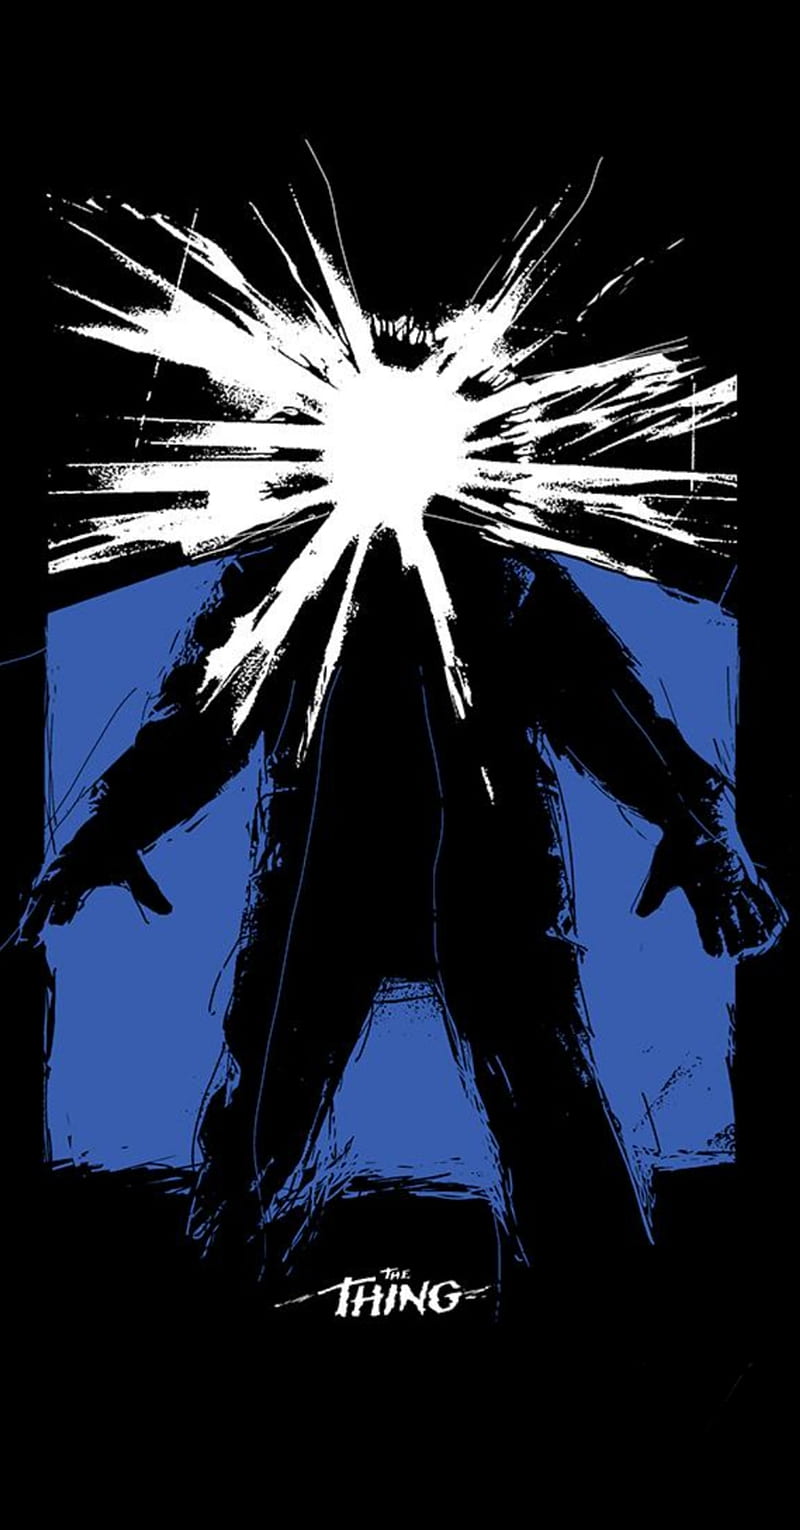 John Carpenters The Thing  Horror movie scenes Horror posters Classic  films posters